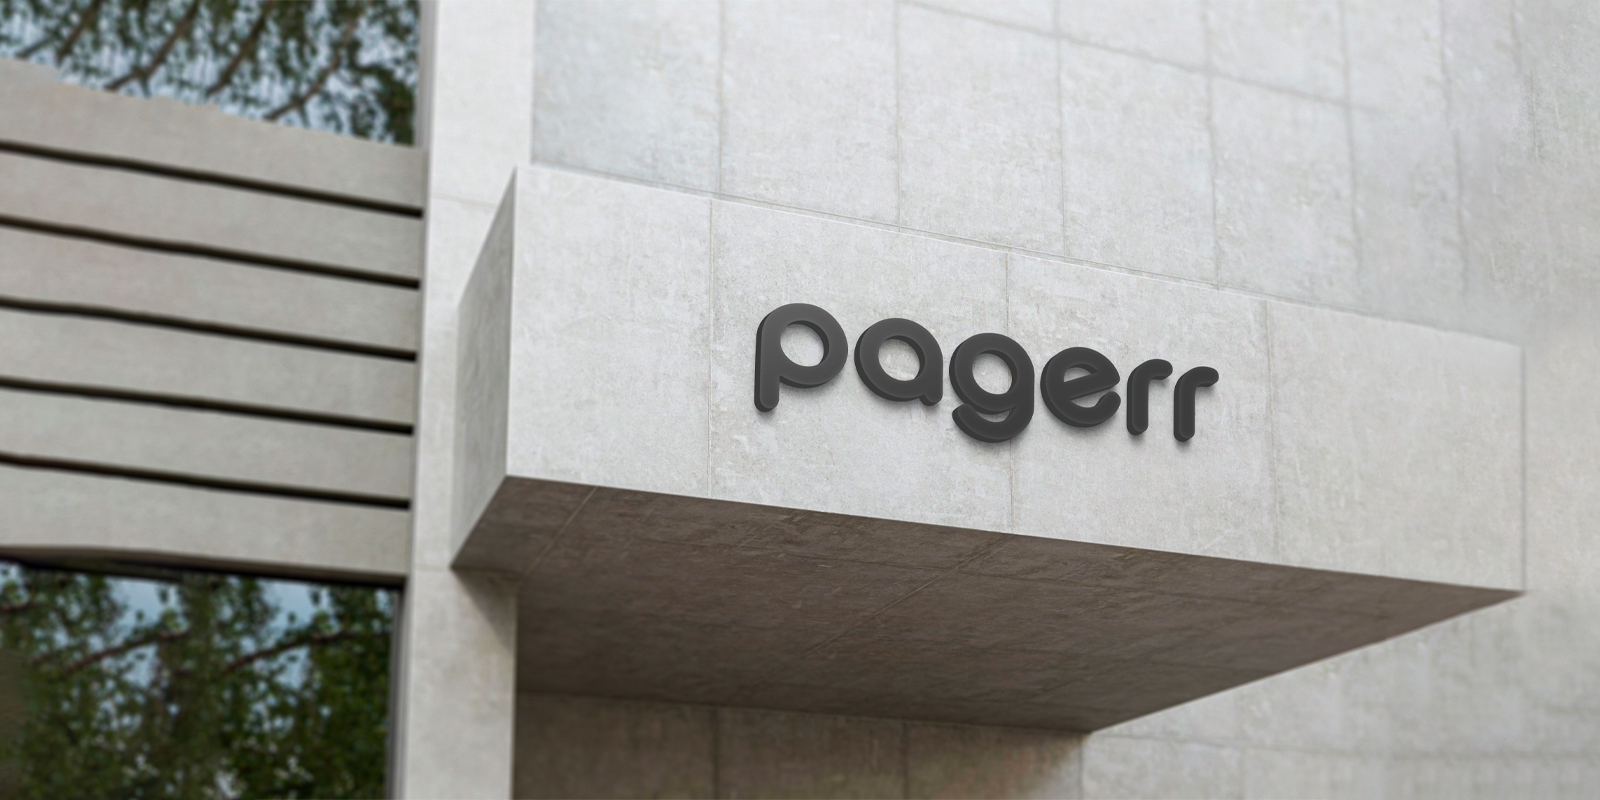 Logo signs in Berlin - Print with Pagerr